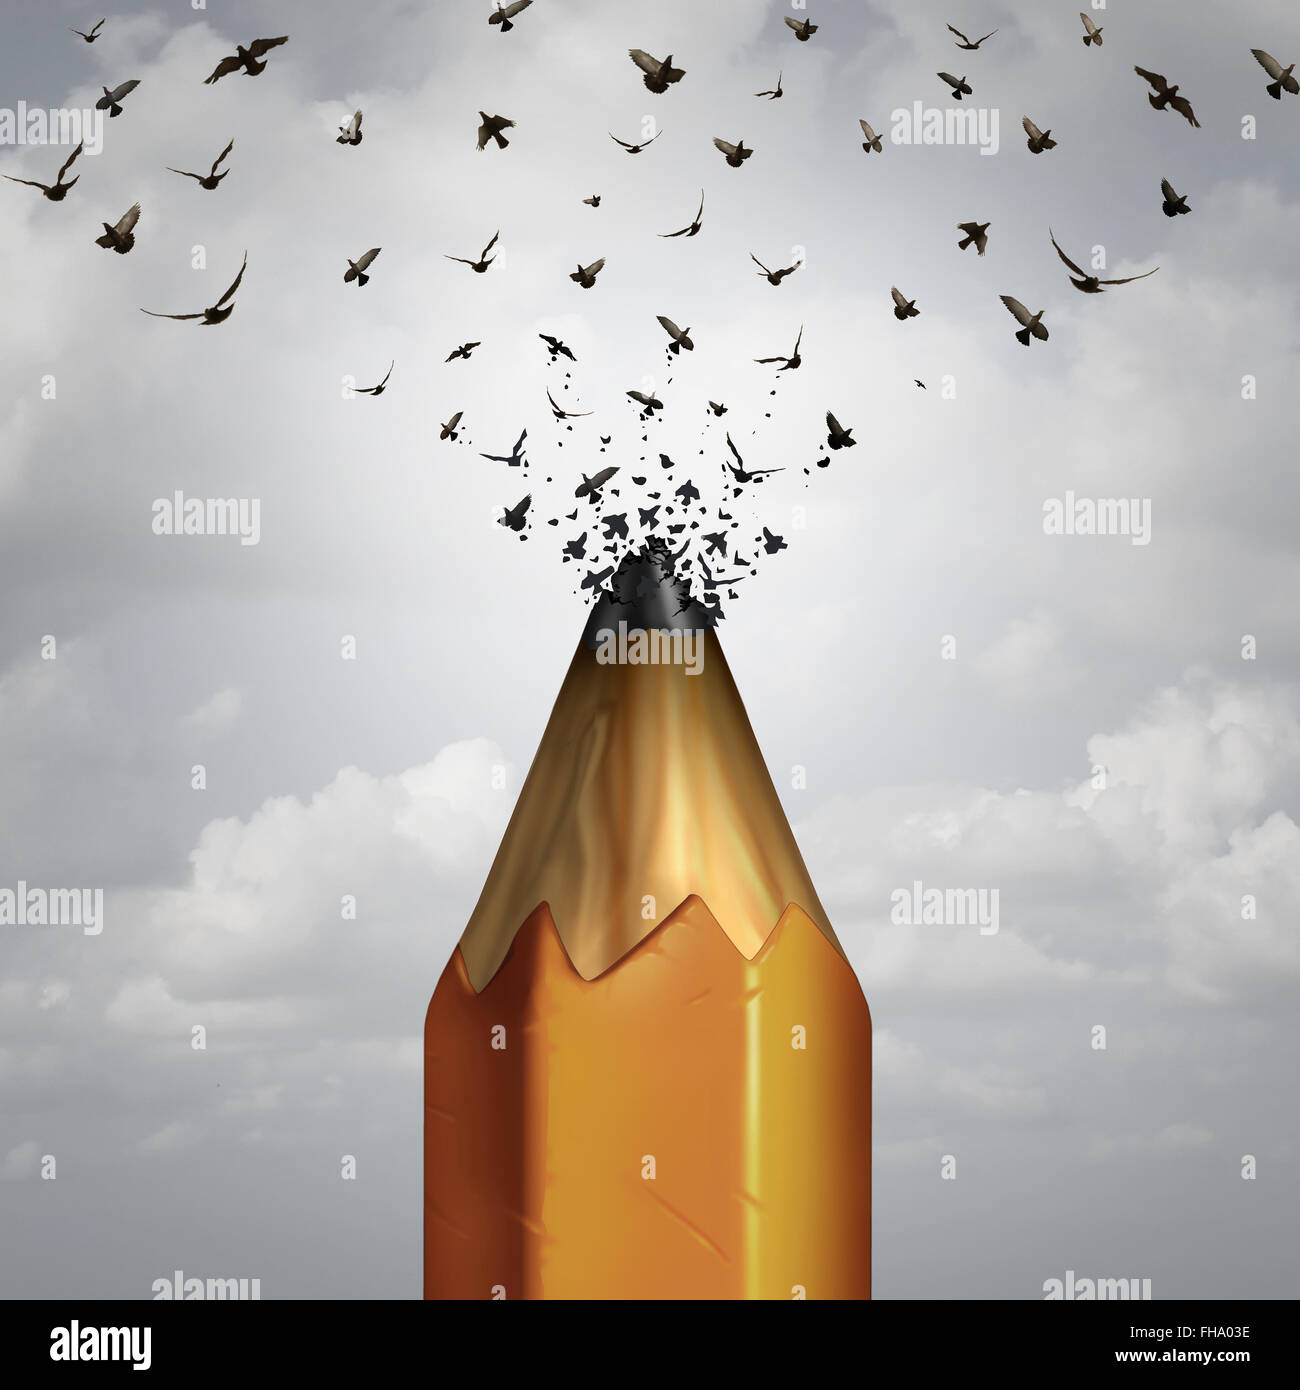 Creative pencil and take flight success concept as the lead of a pencil tip breaking away transforming into a group of birds taking off to freedom as an icon of marketing education and business creativity. Stock Photo